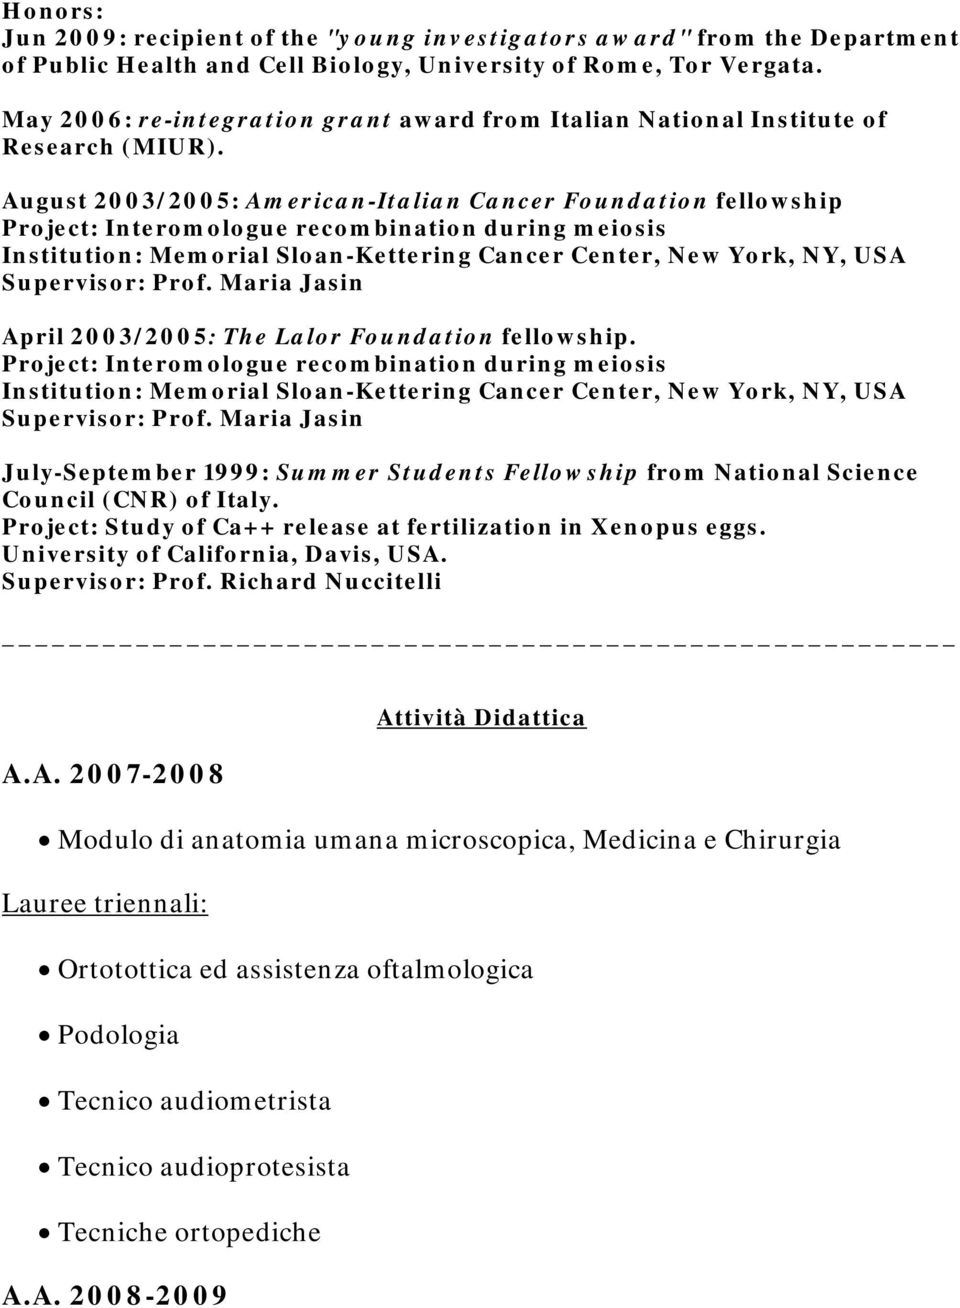 August 2003/2005: American-Italian Cancer Foundation fellowship Project: Interomologue recombination during meiosis Institution: Memorial Sloan-Kettering Cancer Center, New York, NY, USA Supervisor: